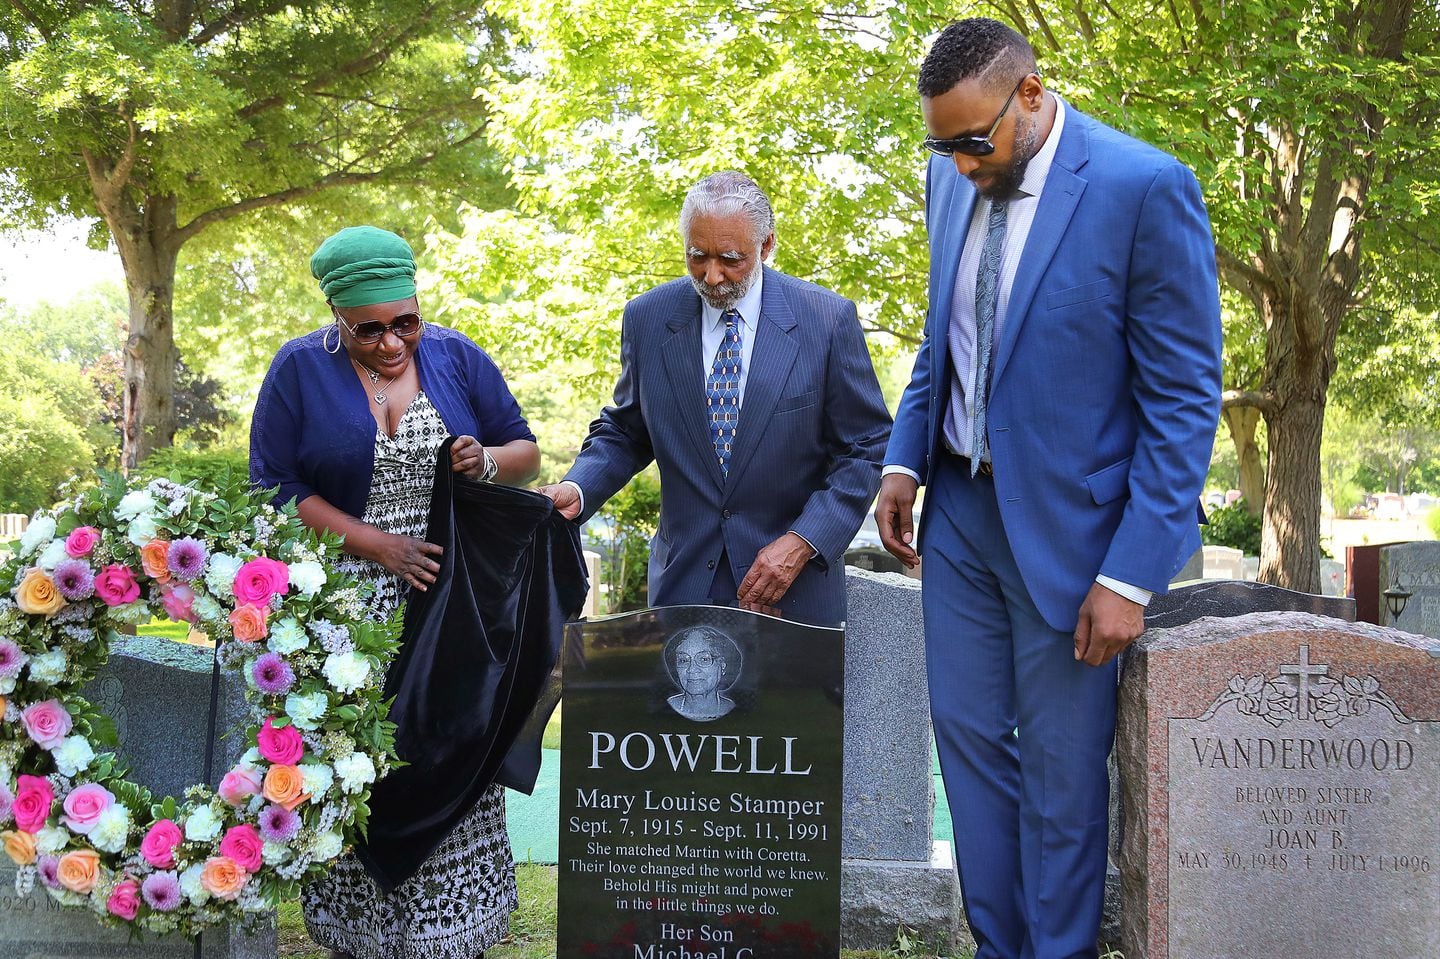 A grave stone unveiling and dove release in honor of Mary Louise Powell, a Boston educator and the matchmaker of Martin Luther King Jr. and Coretta Scott, was held at St. Joseph’s Cemetery on Tuesday.